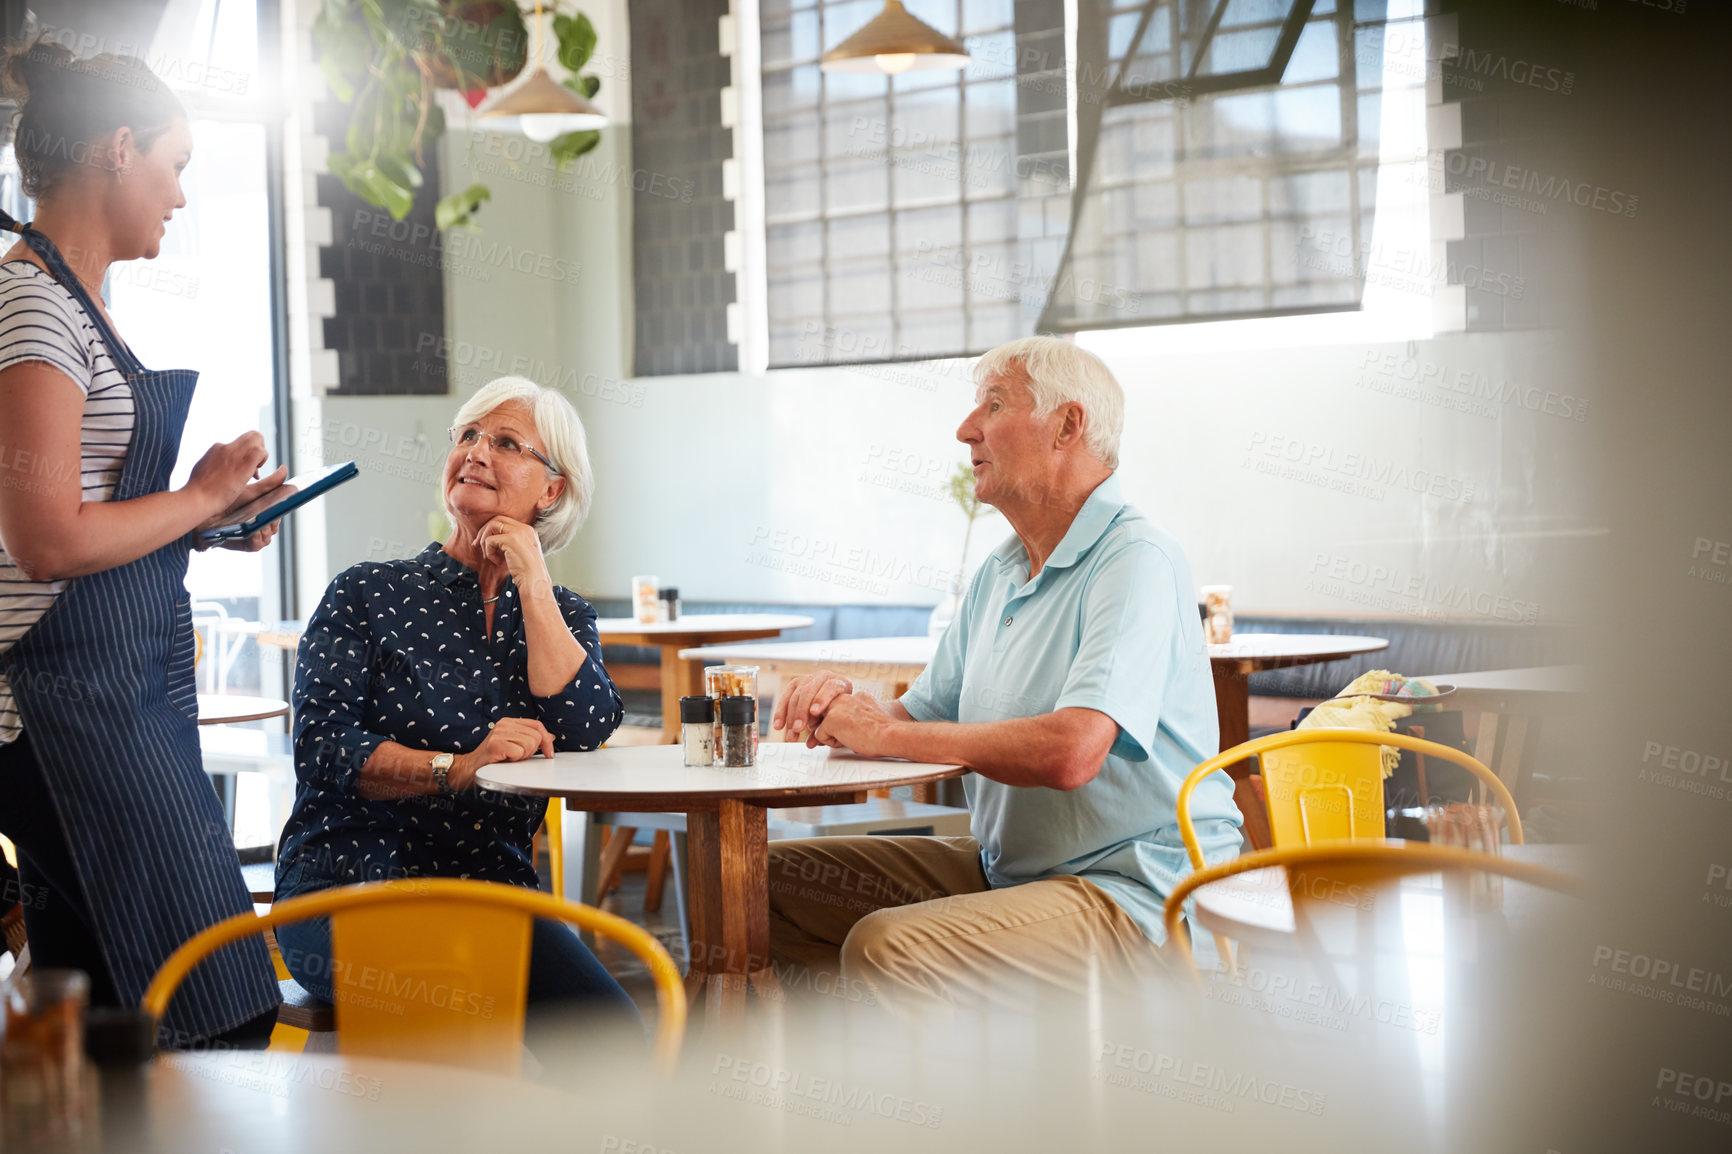 Buy stock photo Cropped shot of a senior couple being served by a waitress